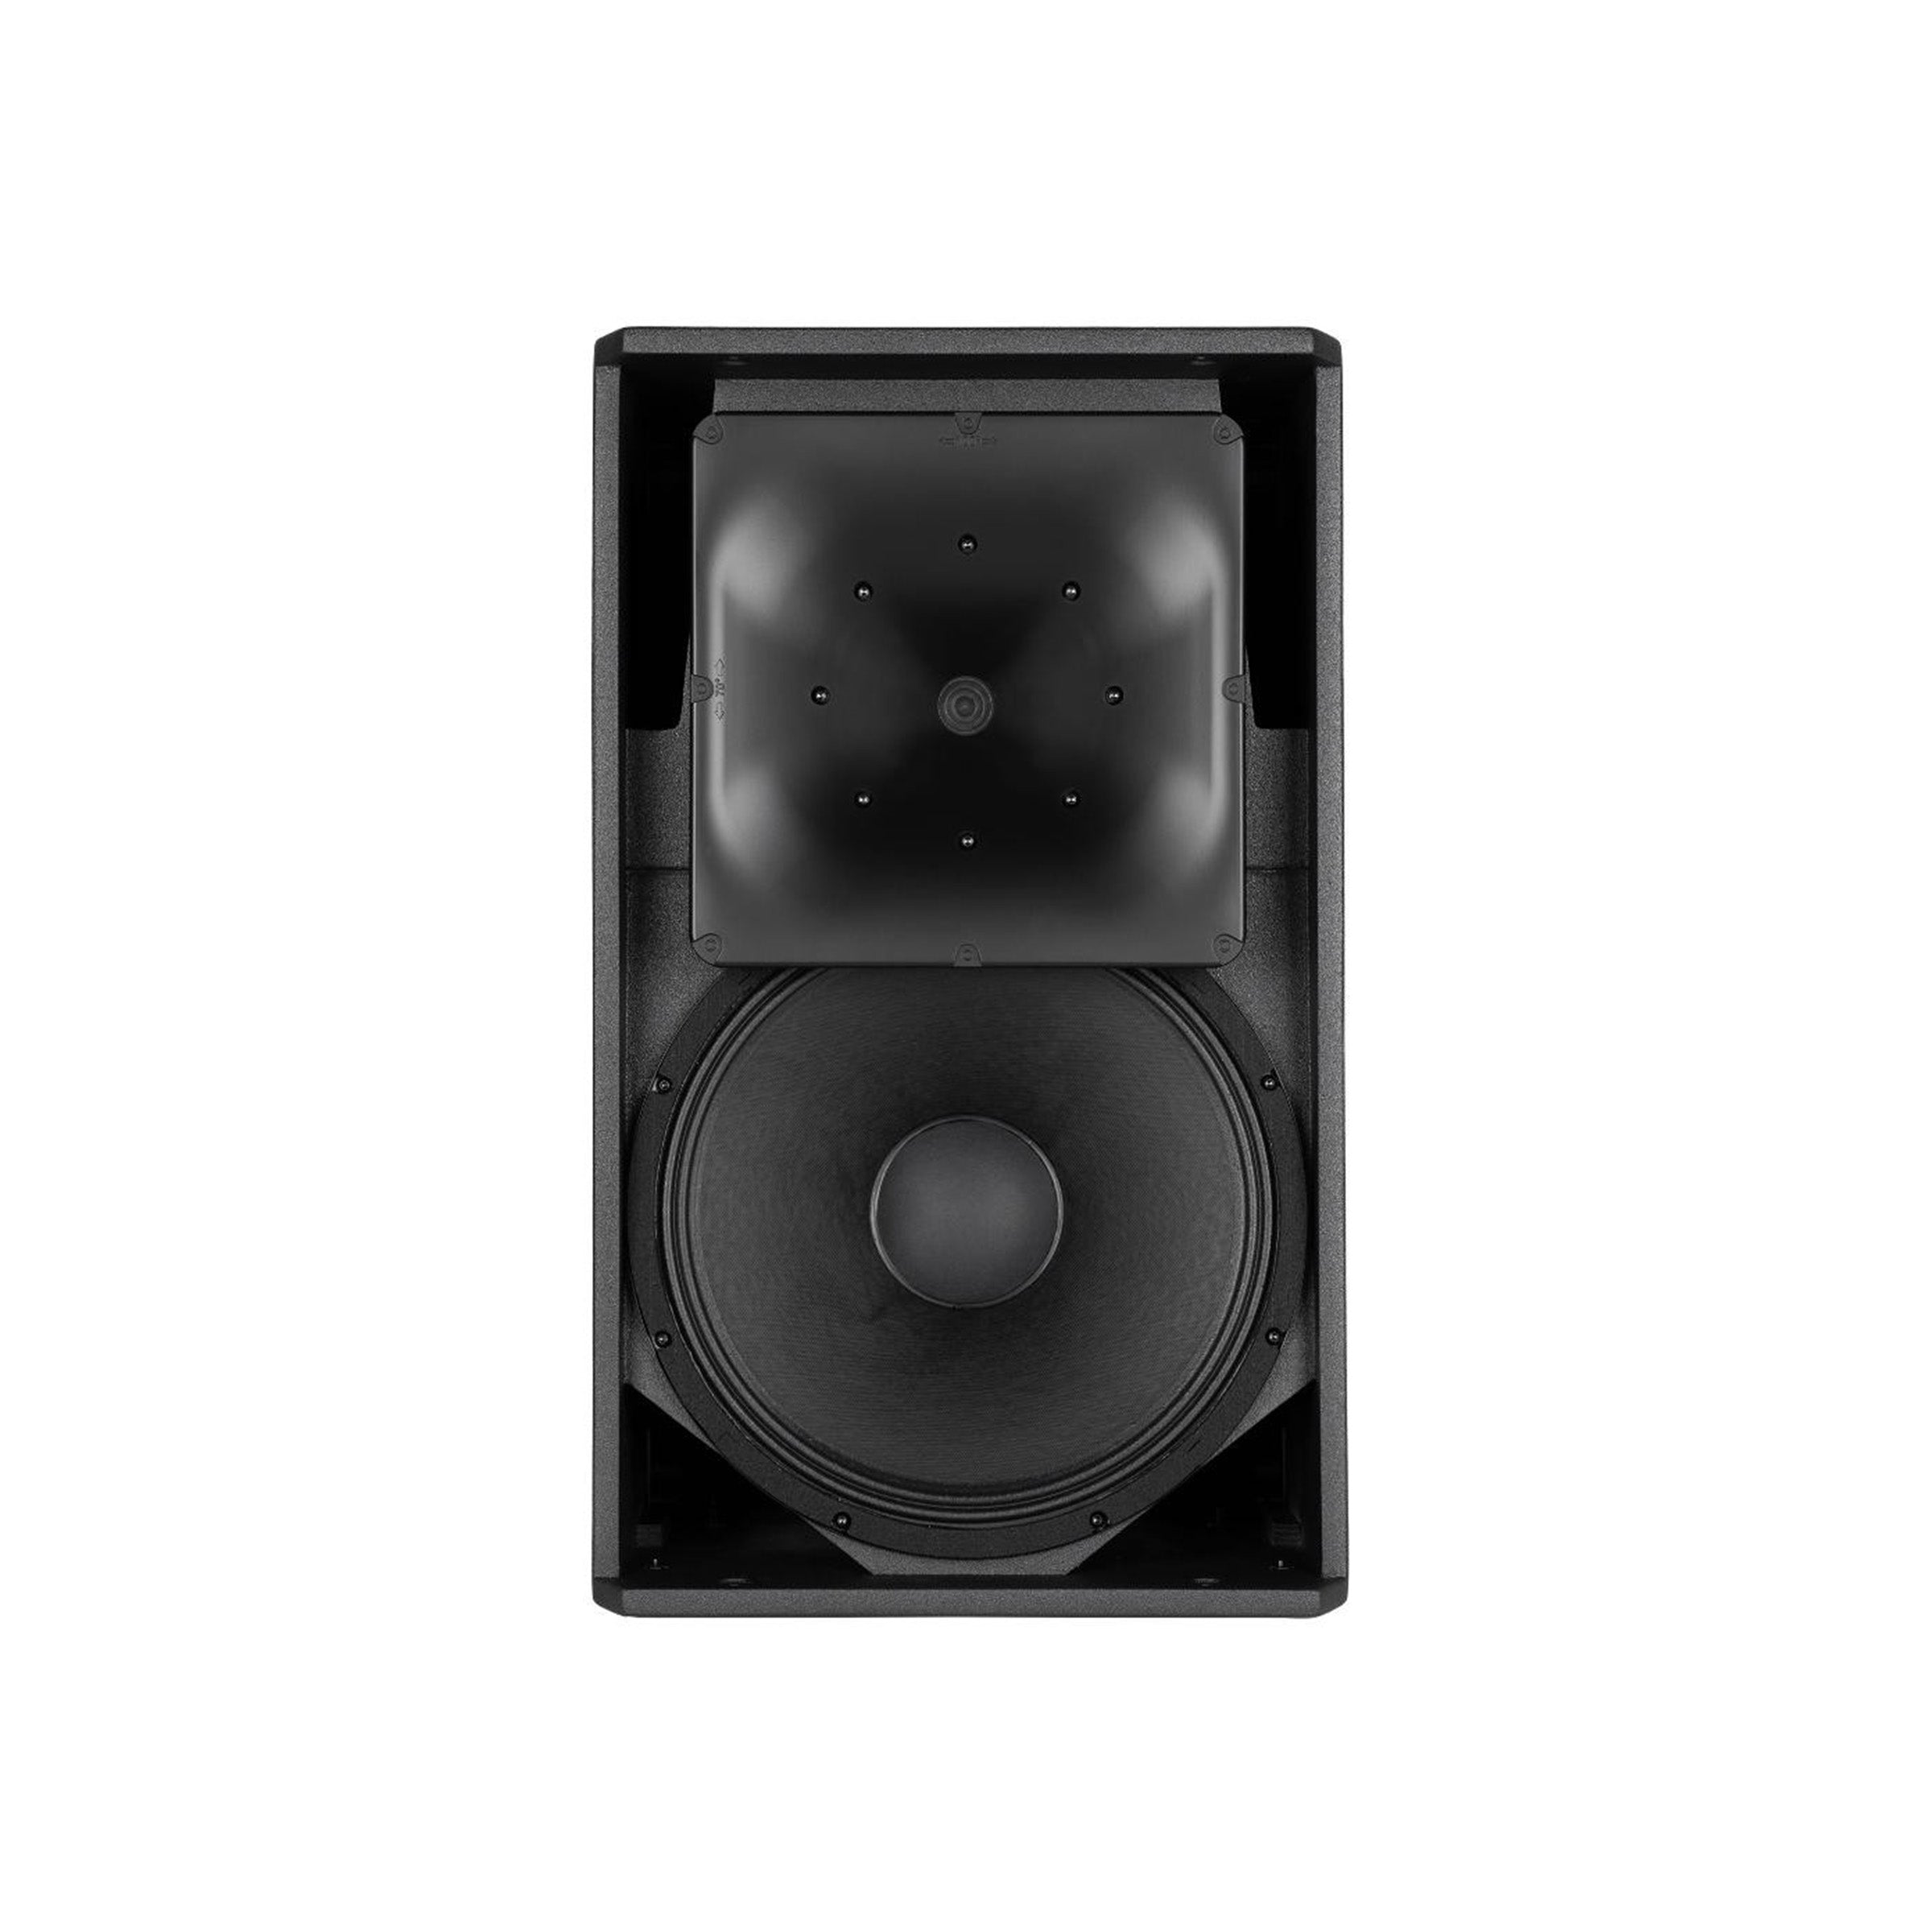 RCF NX 945-A Two-Way Active Speaker (Pair)